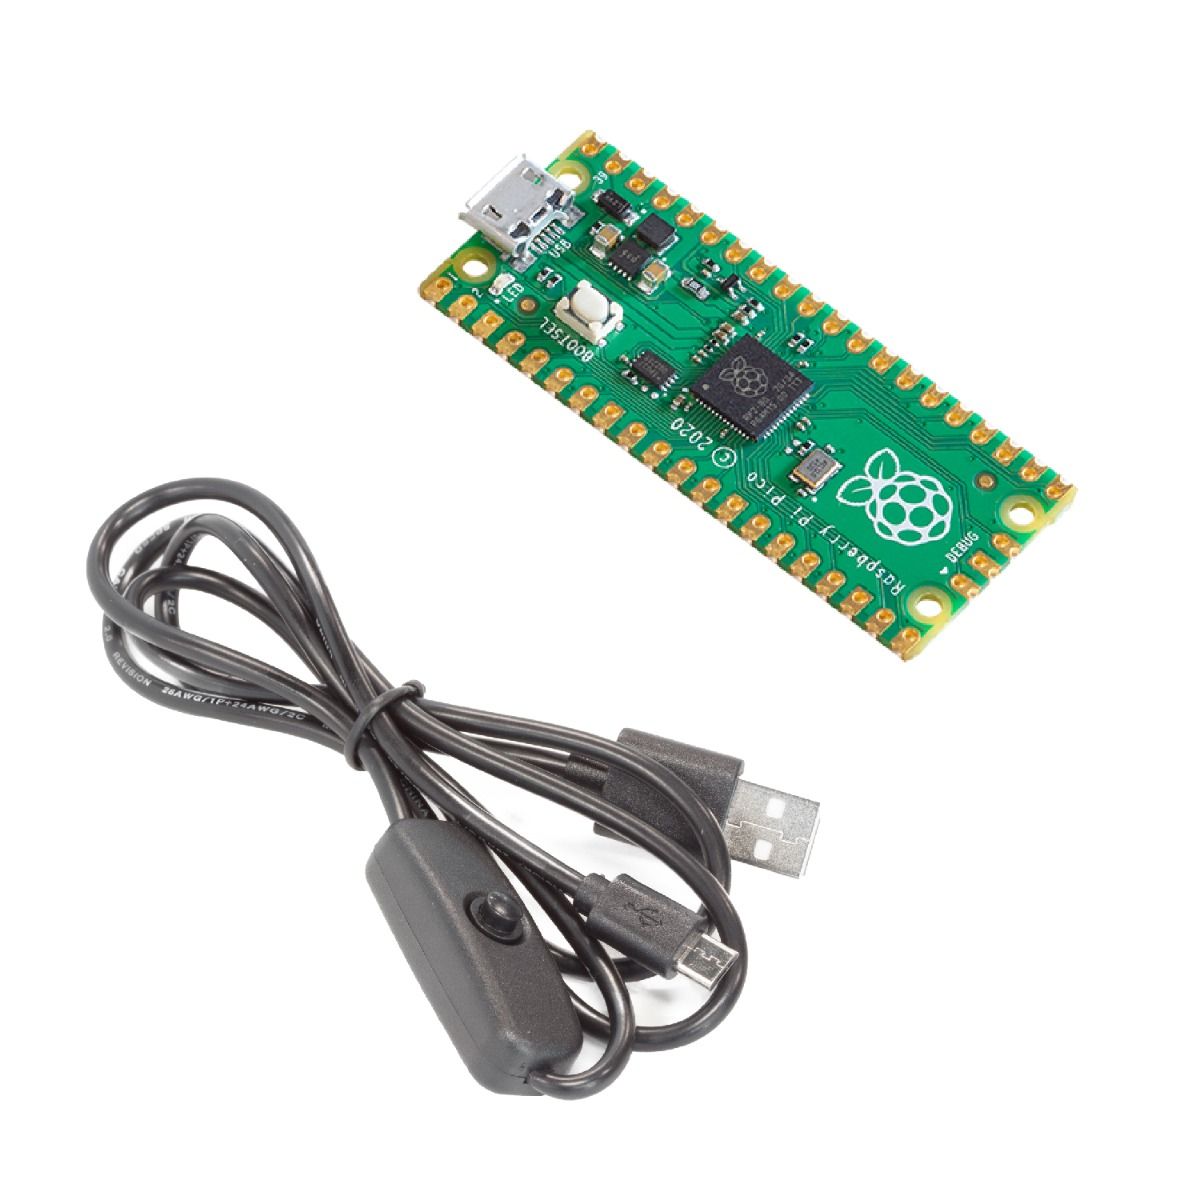 Ensomhed 945 Insister UCTRONICS Raspberry Pi Pico, RP2040 Microcontroller Board with Power Switch  Micro USB Cable